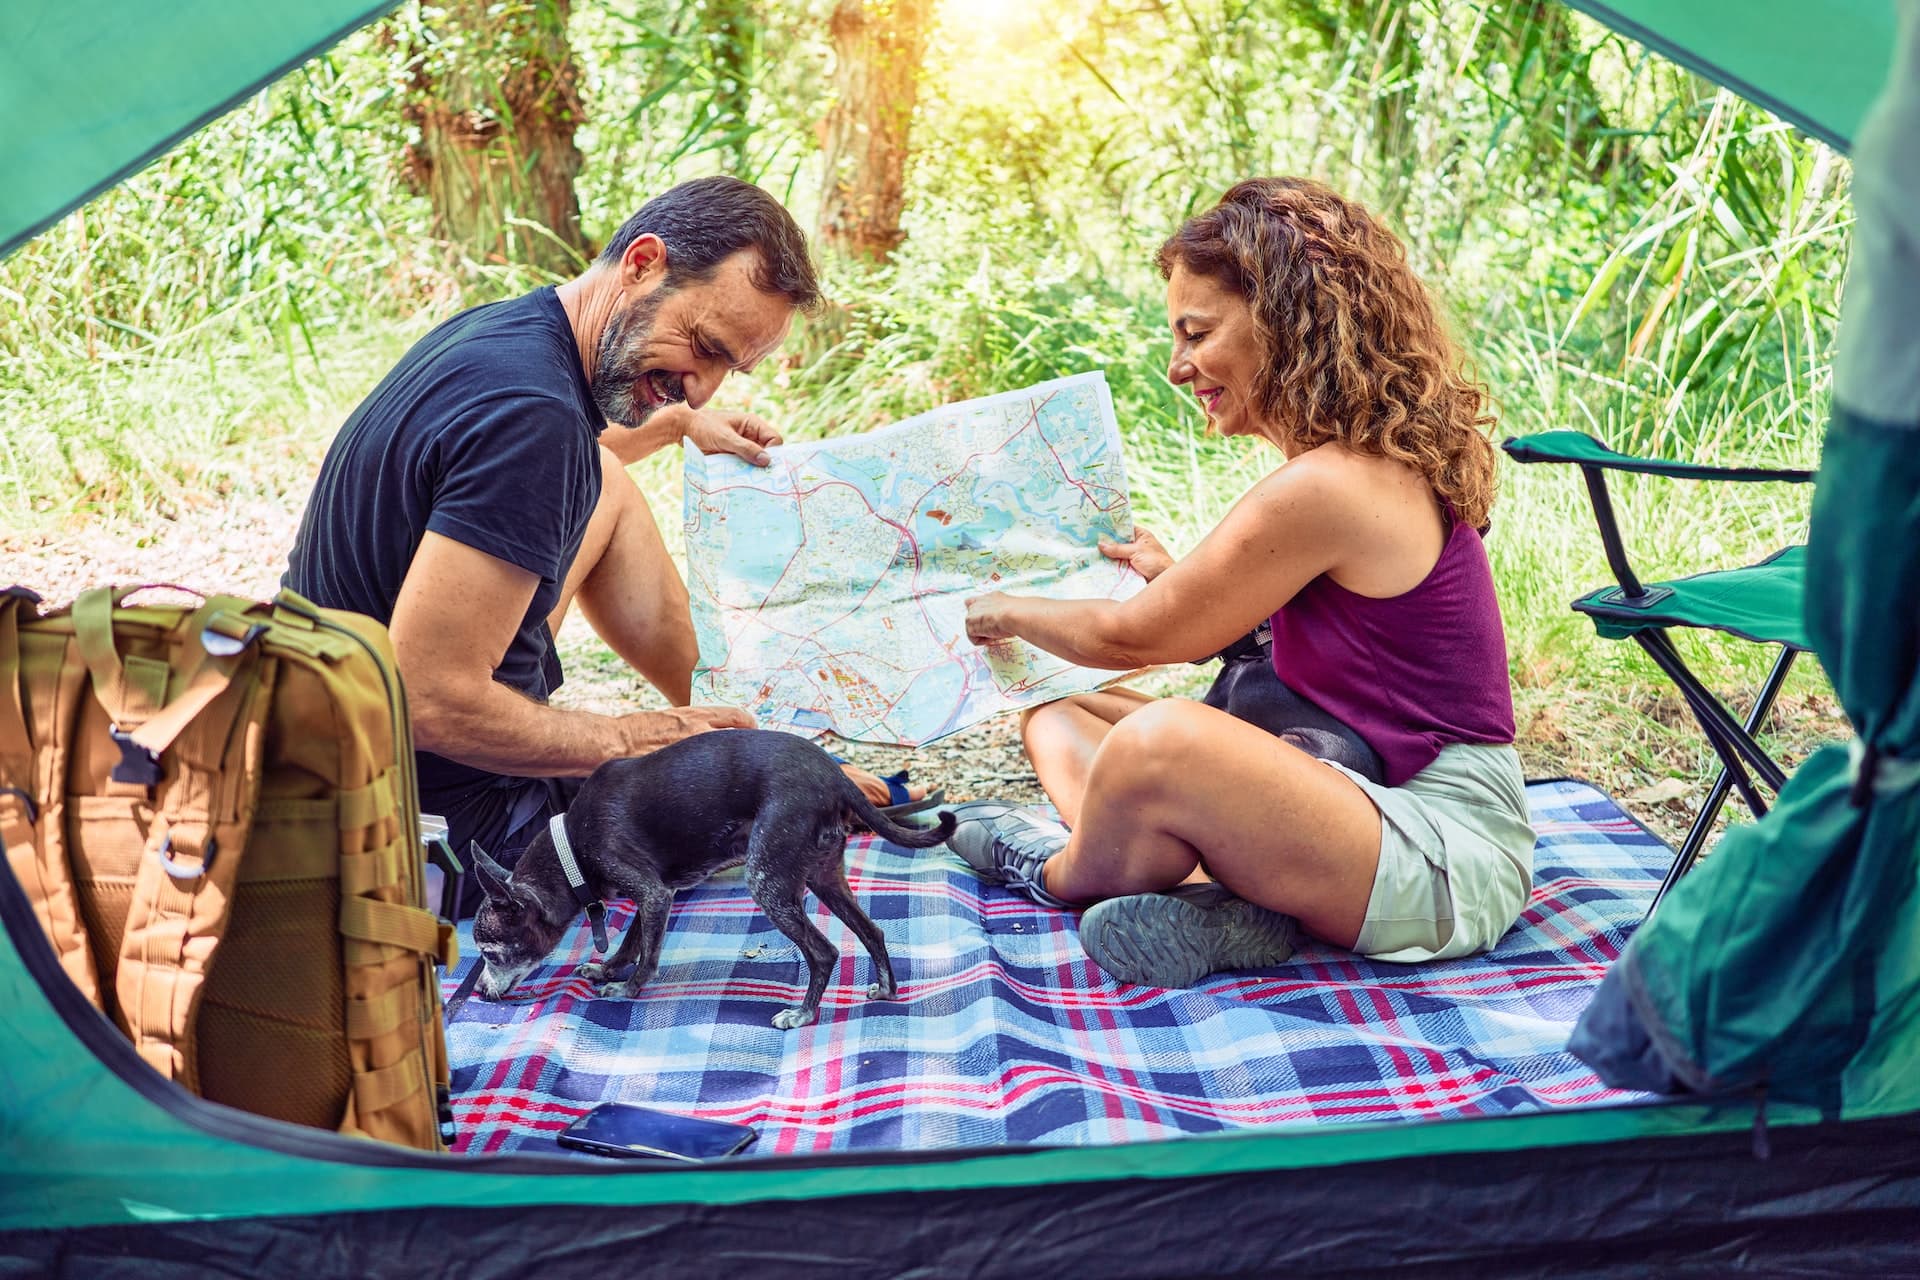 Enjoy The Camp With A Comfortable Camping Mattress